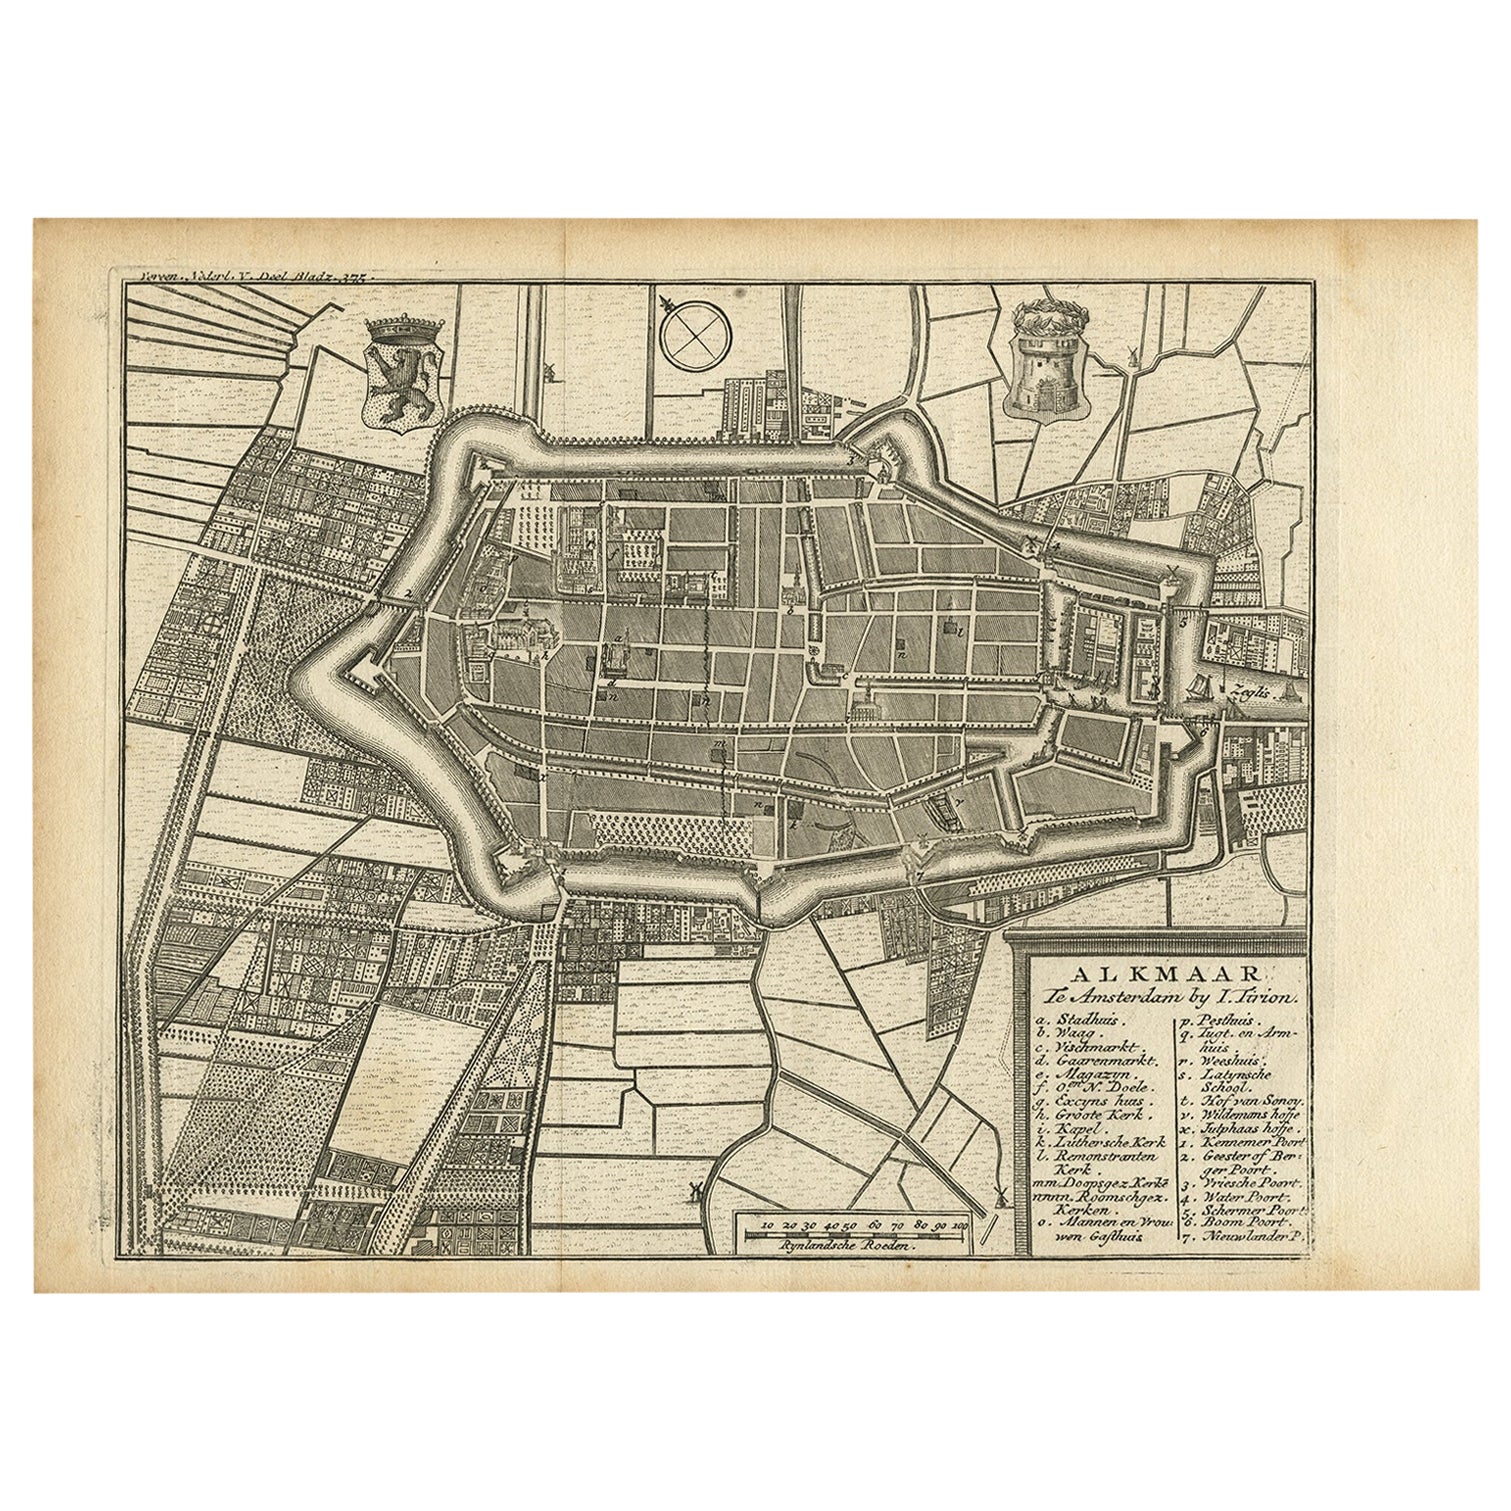 Antique Map of Alkmaar, City Know for Its Cheese Market, Netherlands, circa 1740